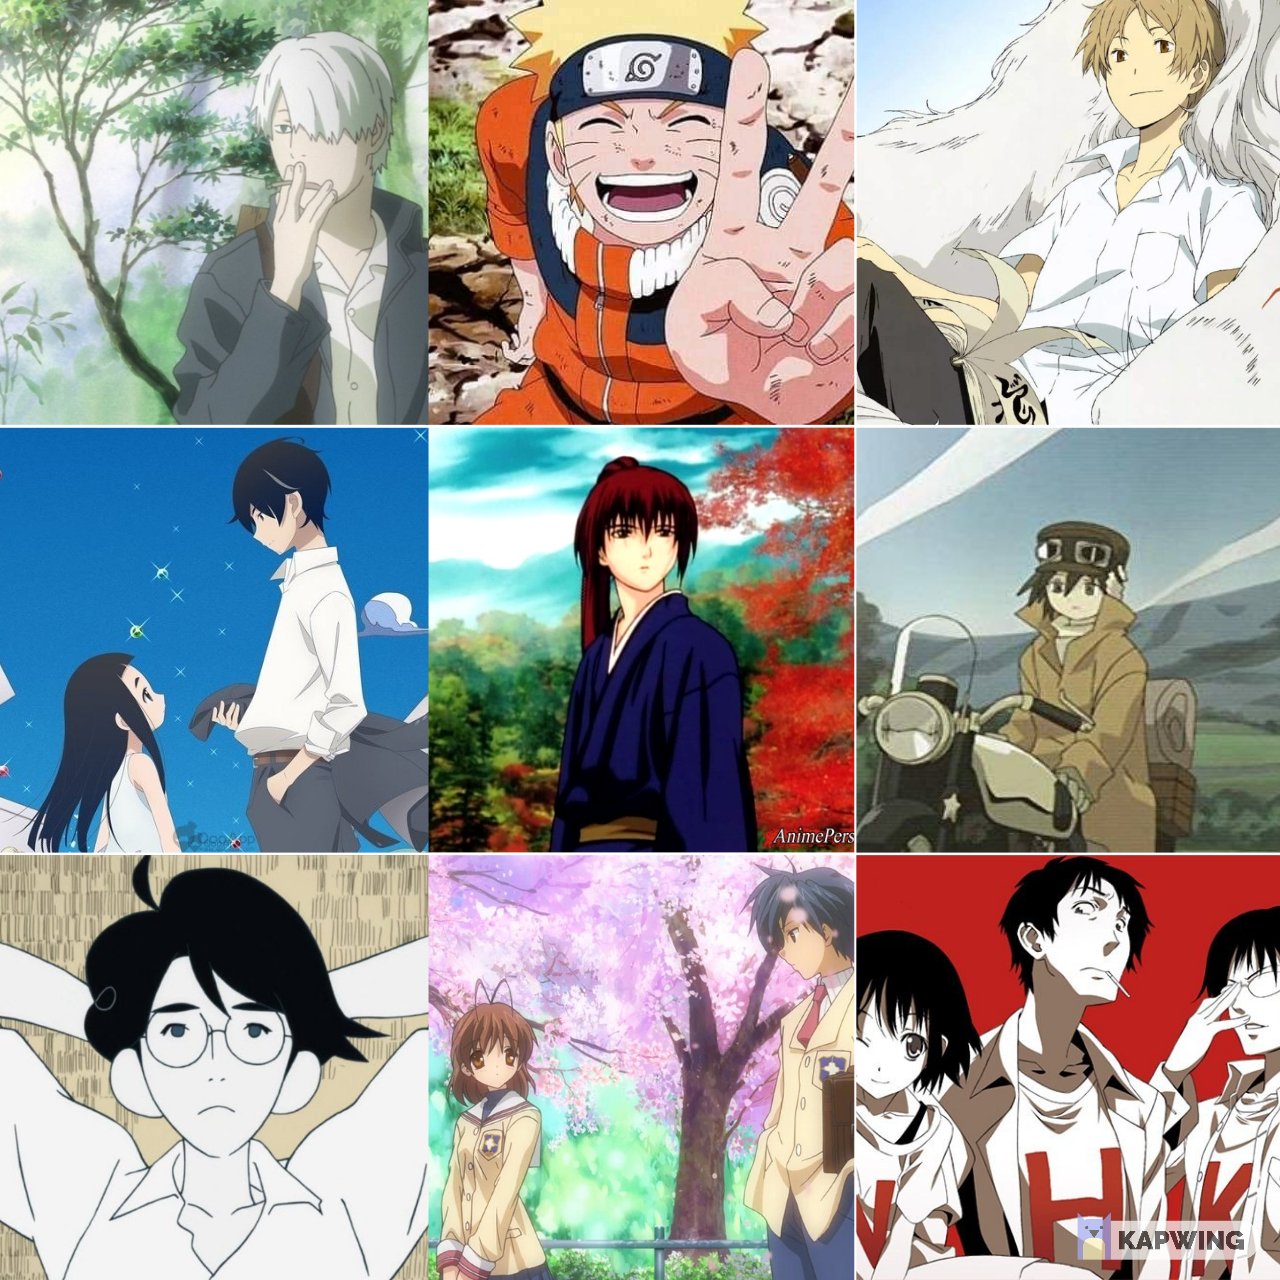 My Anime and Manga respectively 3x3. Even after 10 years, I'm